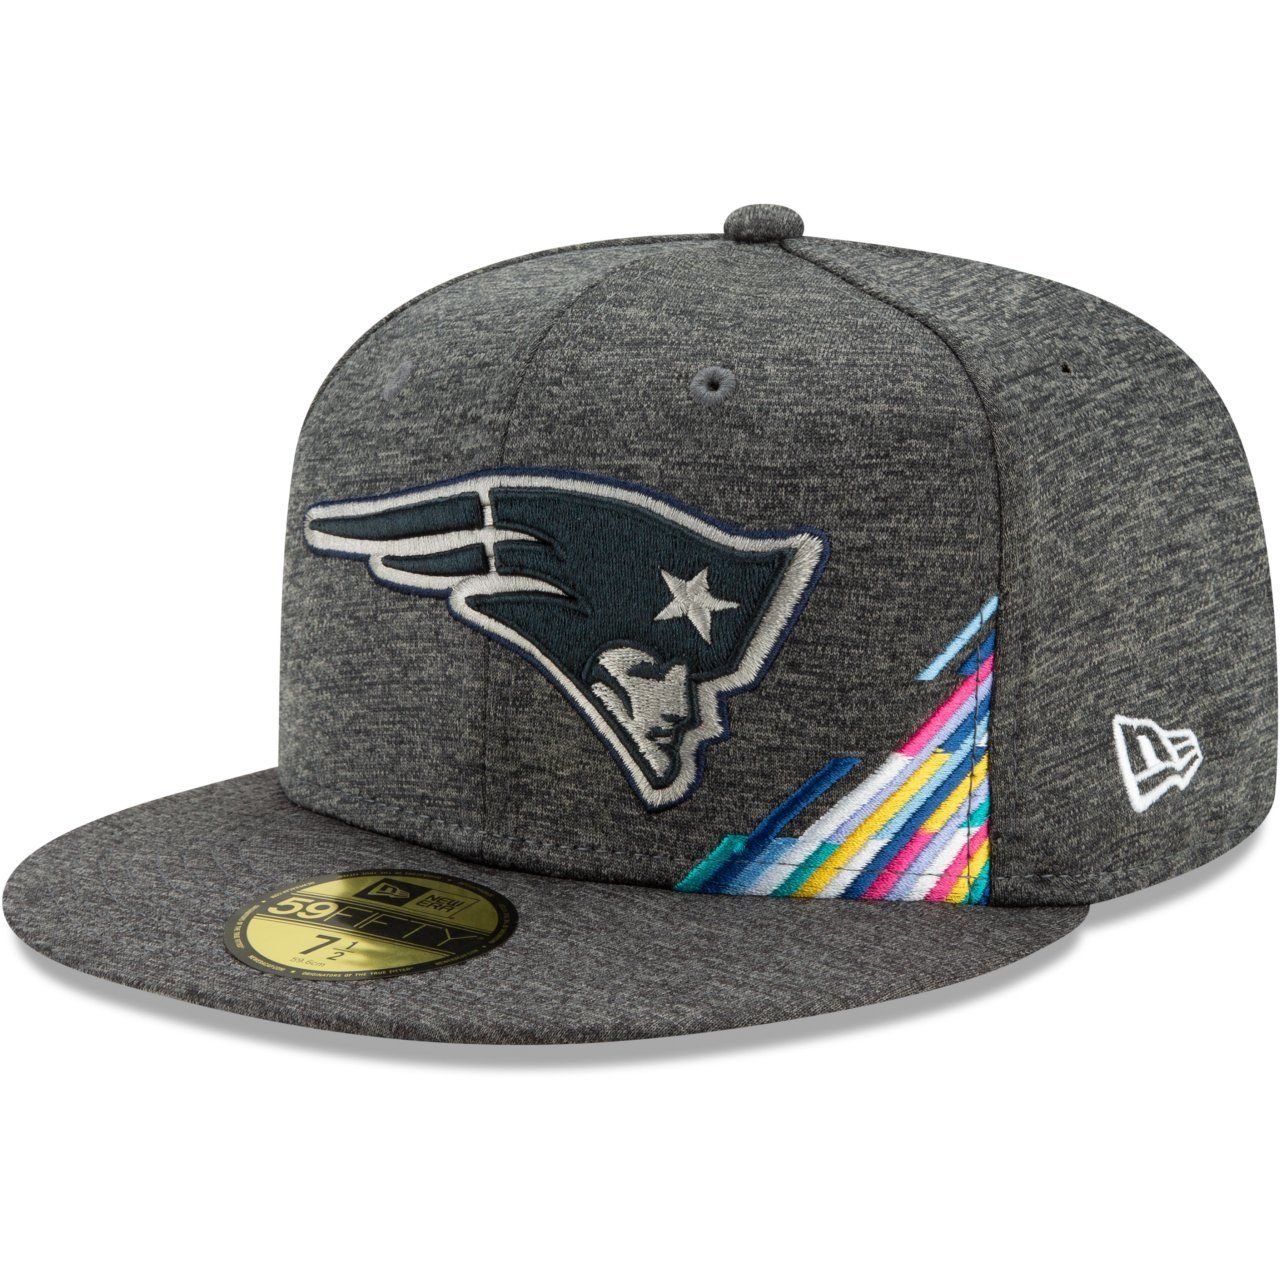 New Era Fitted Cap 59Fifty CRUCIAL CATCH NFL Teams New England Patriots